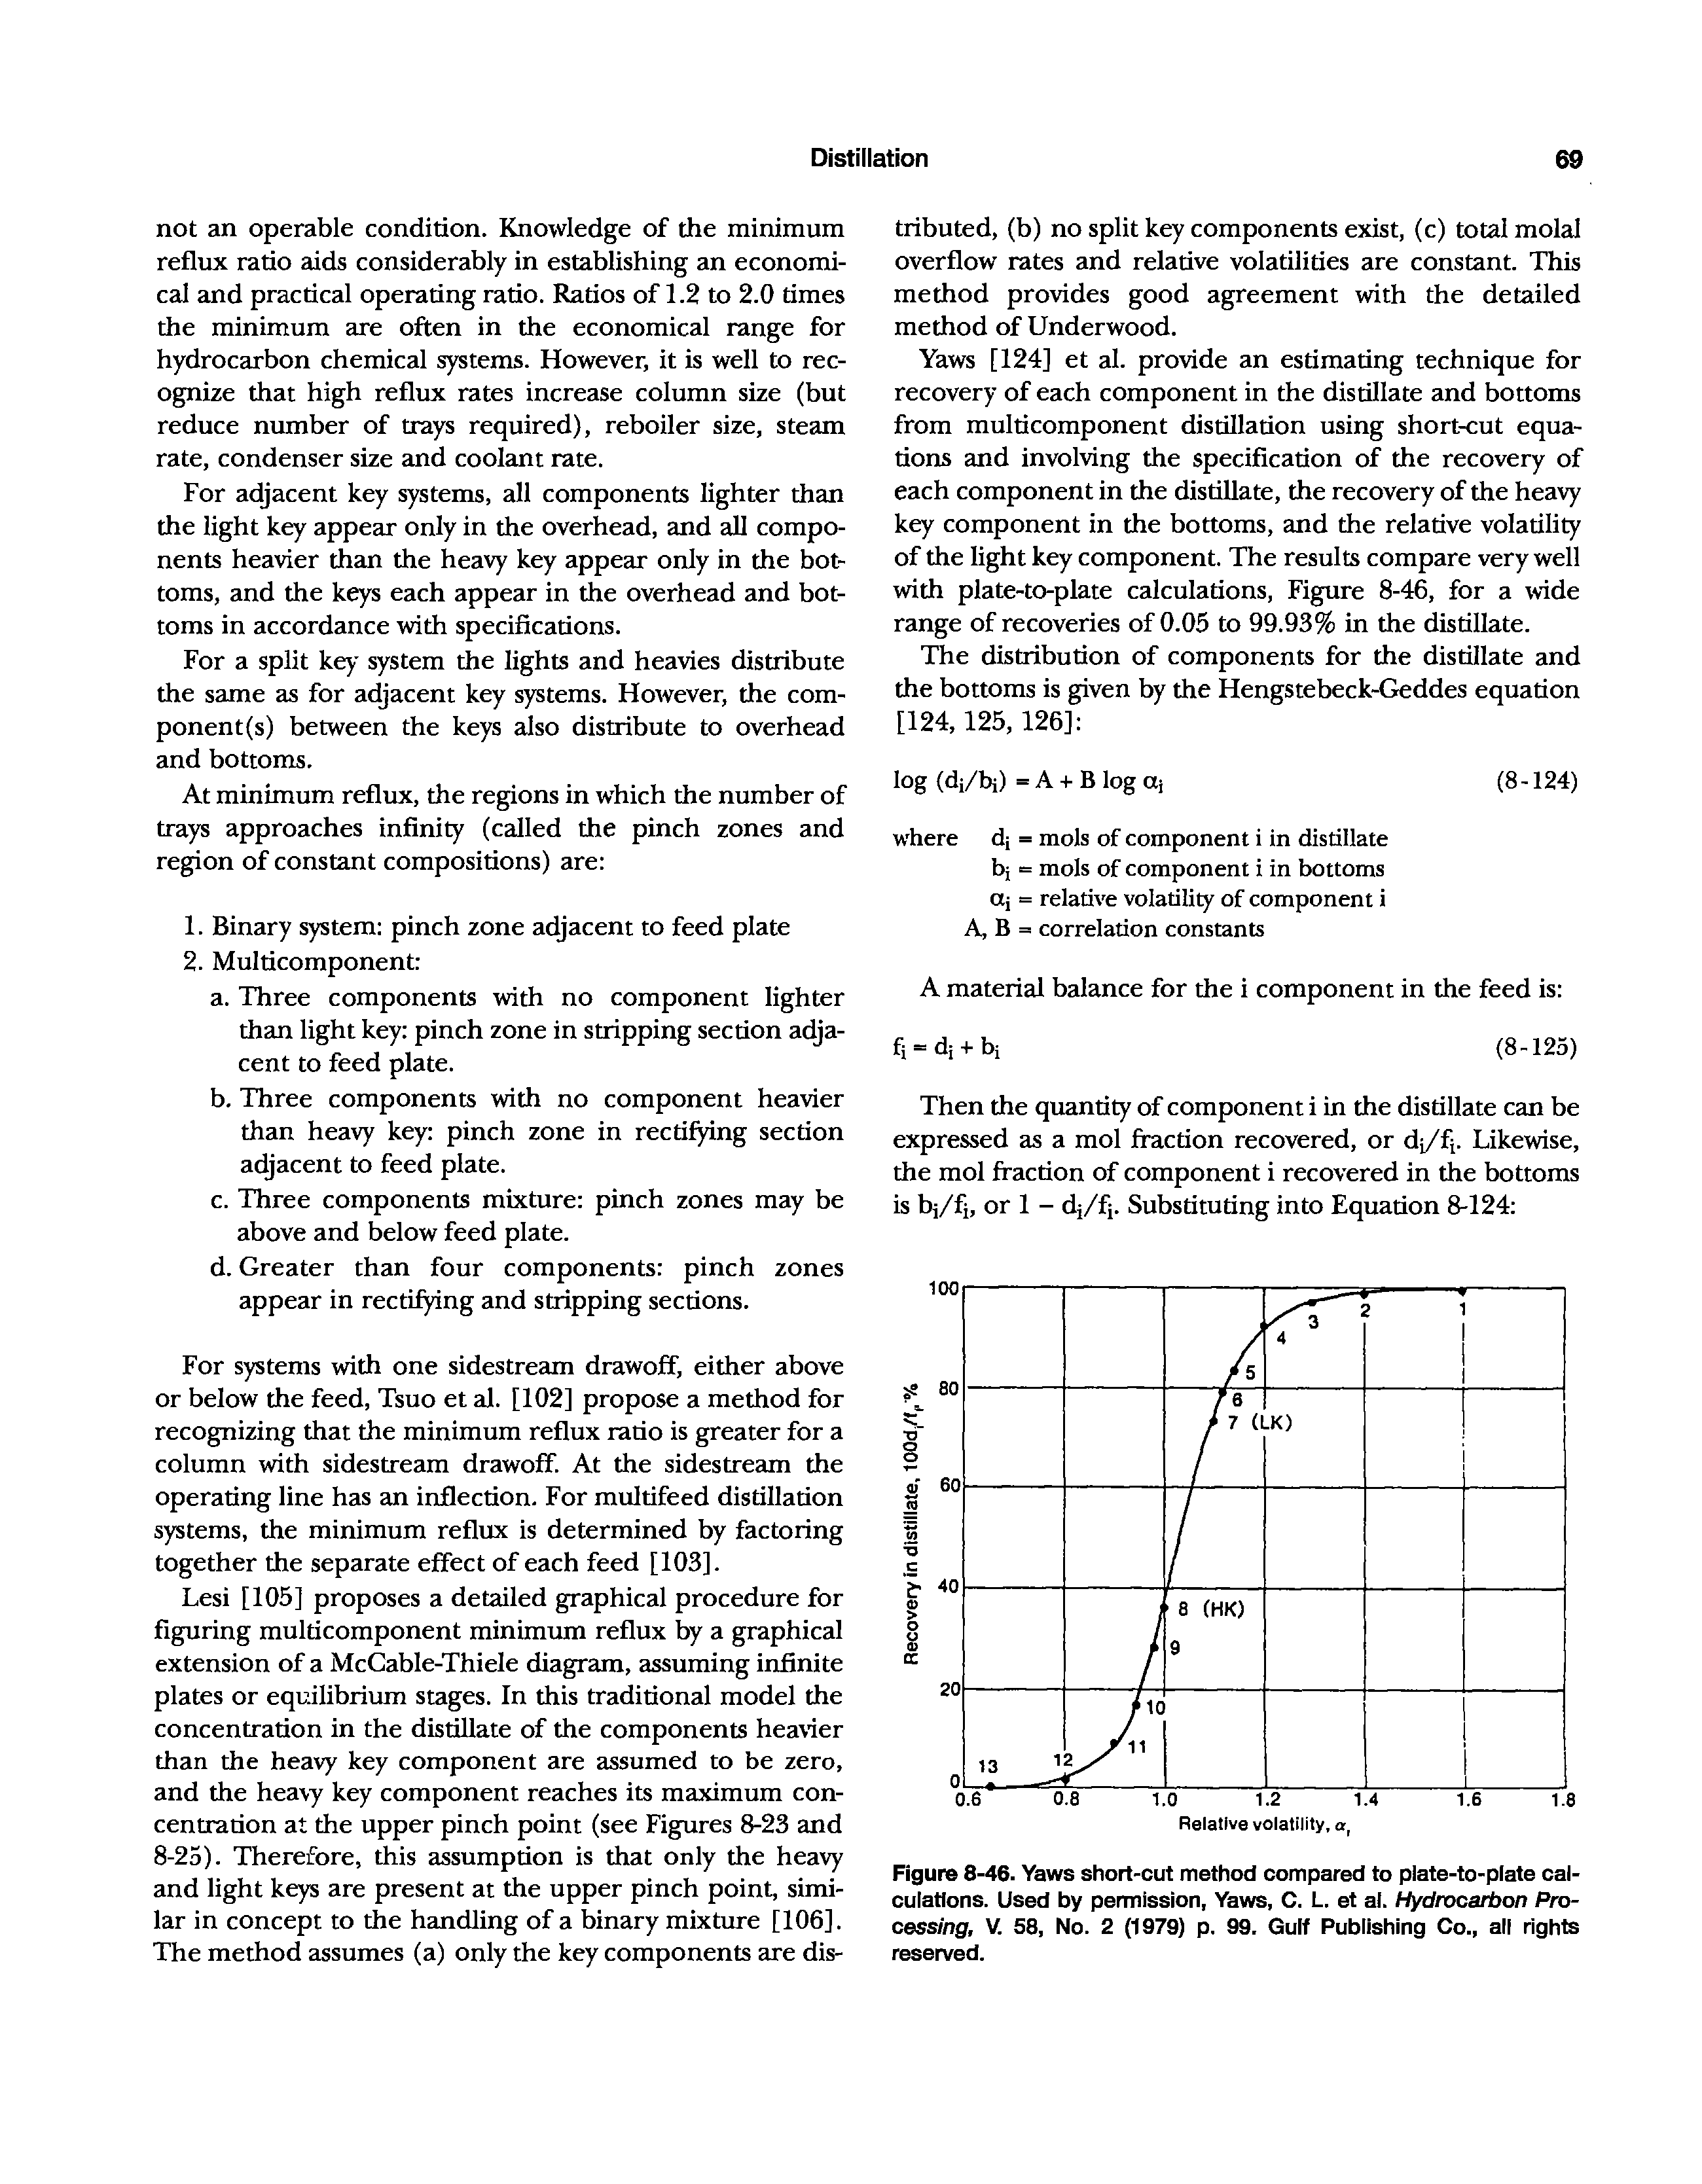 Figure 8-46. Yaws short-cut method compared to plate-to-plate calculations. Used by permission, Yaws, C. L. et al. Hydrocarbon Processing, V. 58, No. 2 (1979) p. 99. Gulf Publishing Co., all rights reserved.